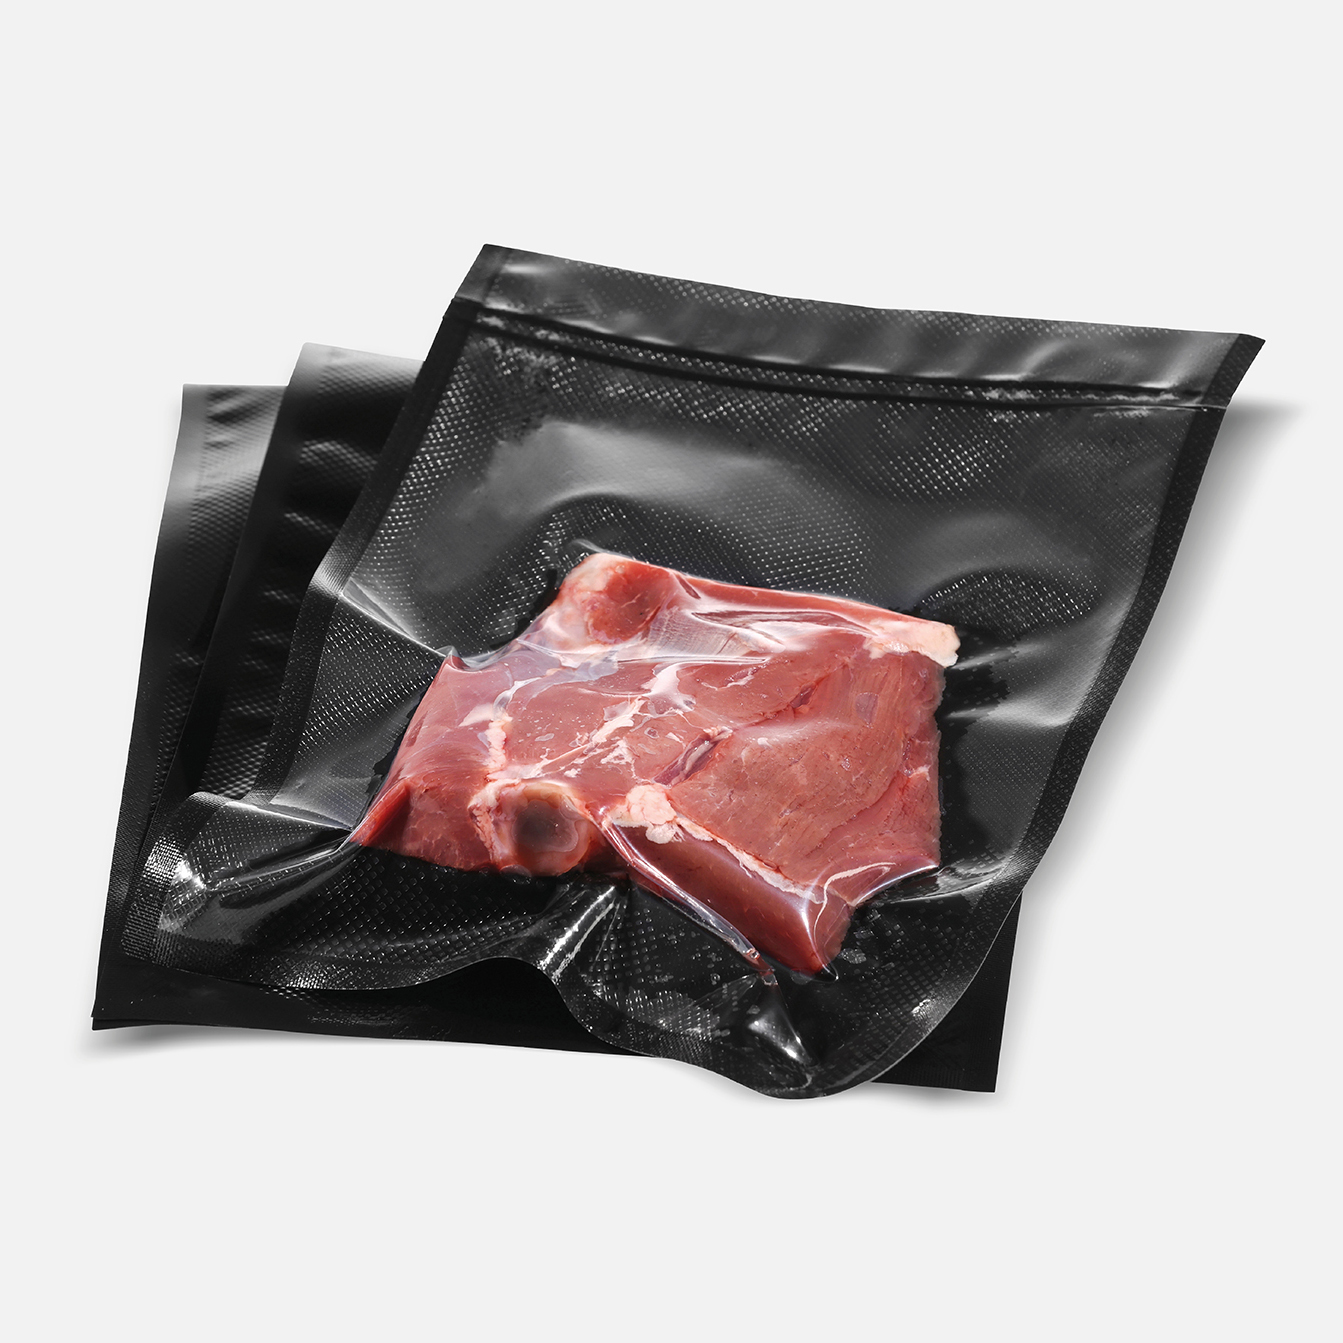 Wet aging of game meat in a vacuum bag